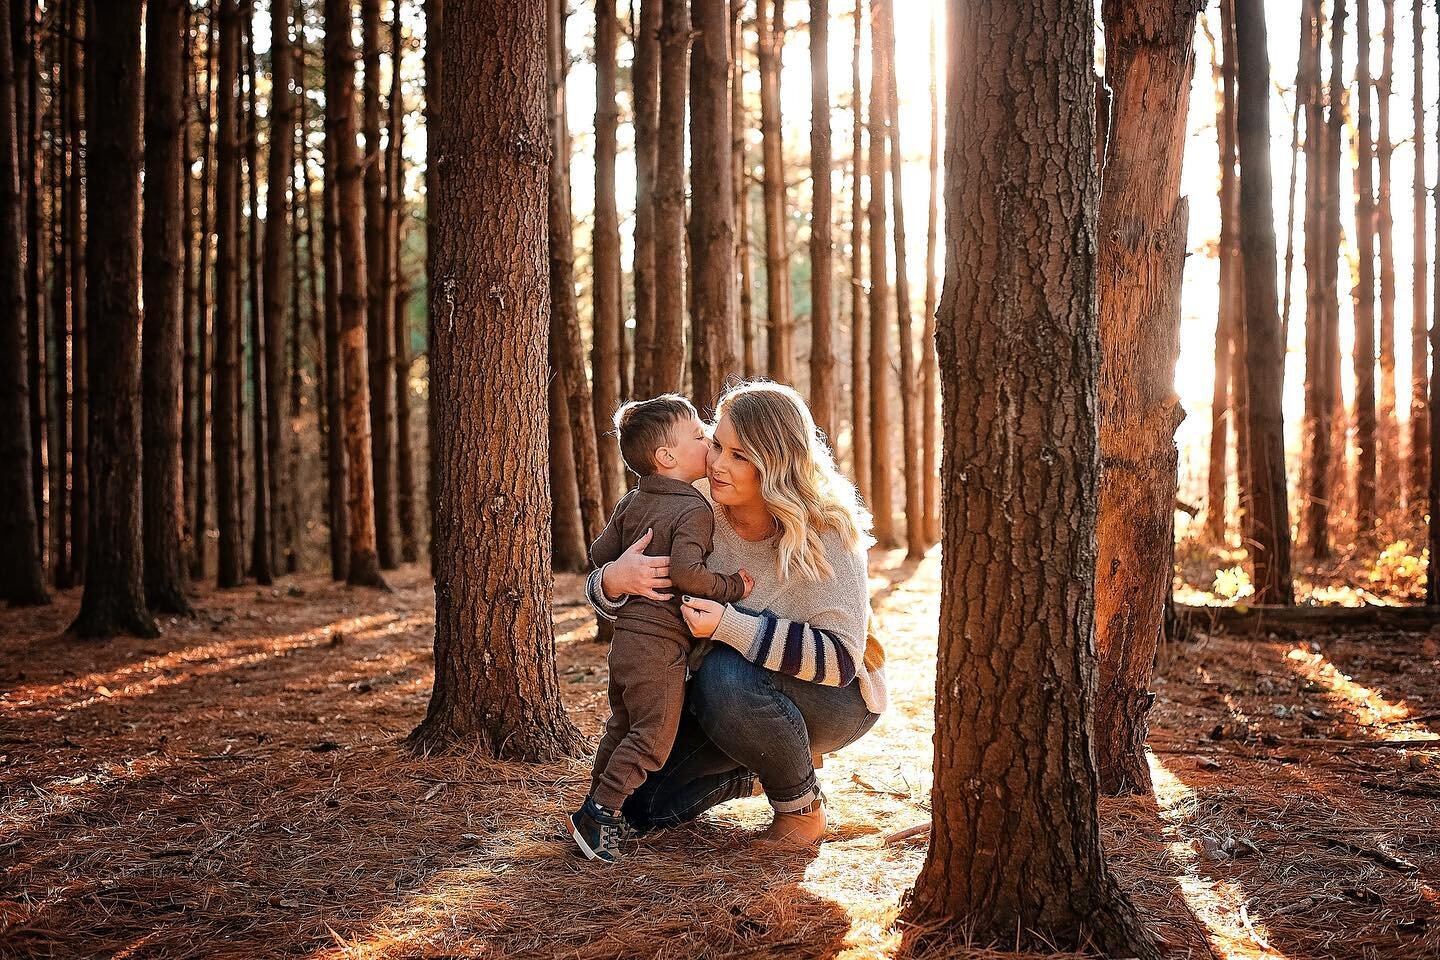 Y&rsquo;all all this heat as me dreaming of fall like shoots. Here&rsquo;s a little throw back of one of my favorite location finds, and my favorite mother/son duo ❤️ #grovecityphotographer #saturdaysundayshootdays #dnfamilies #columbusohiohairstylis